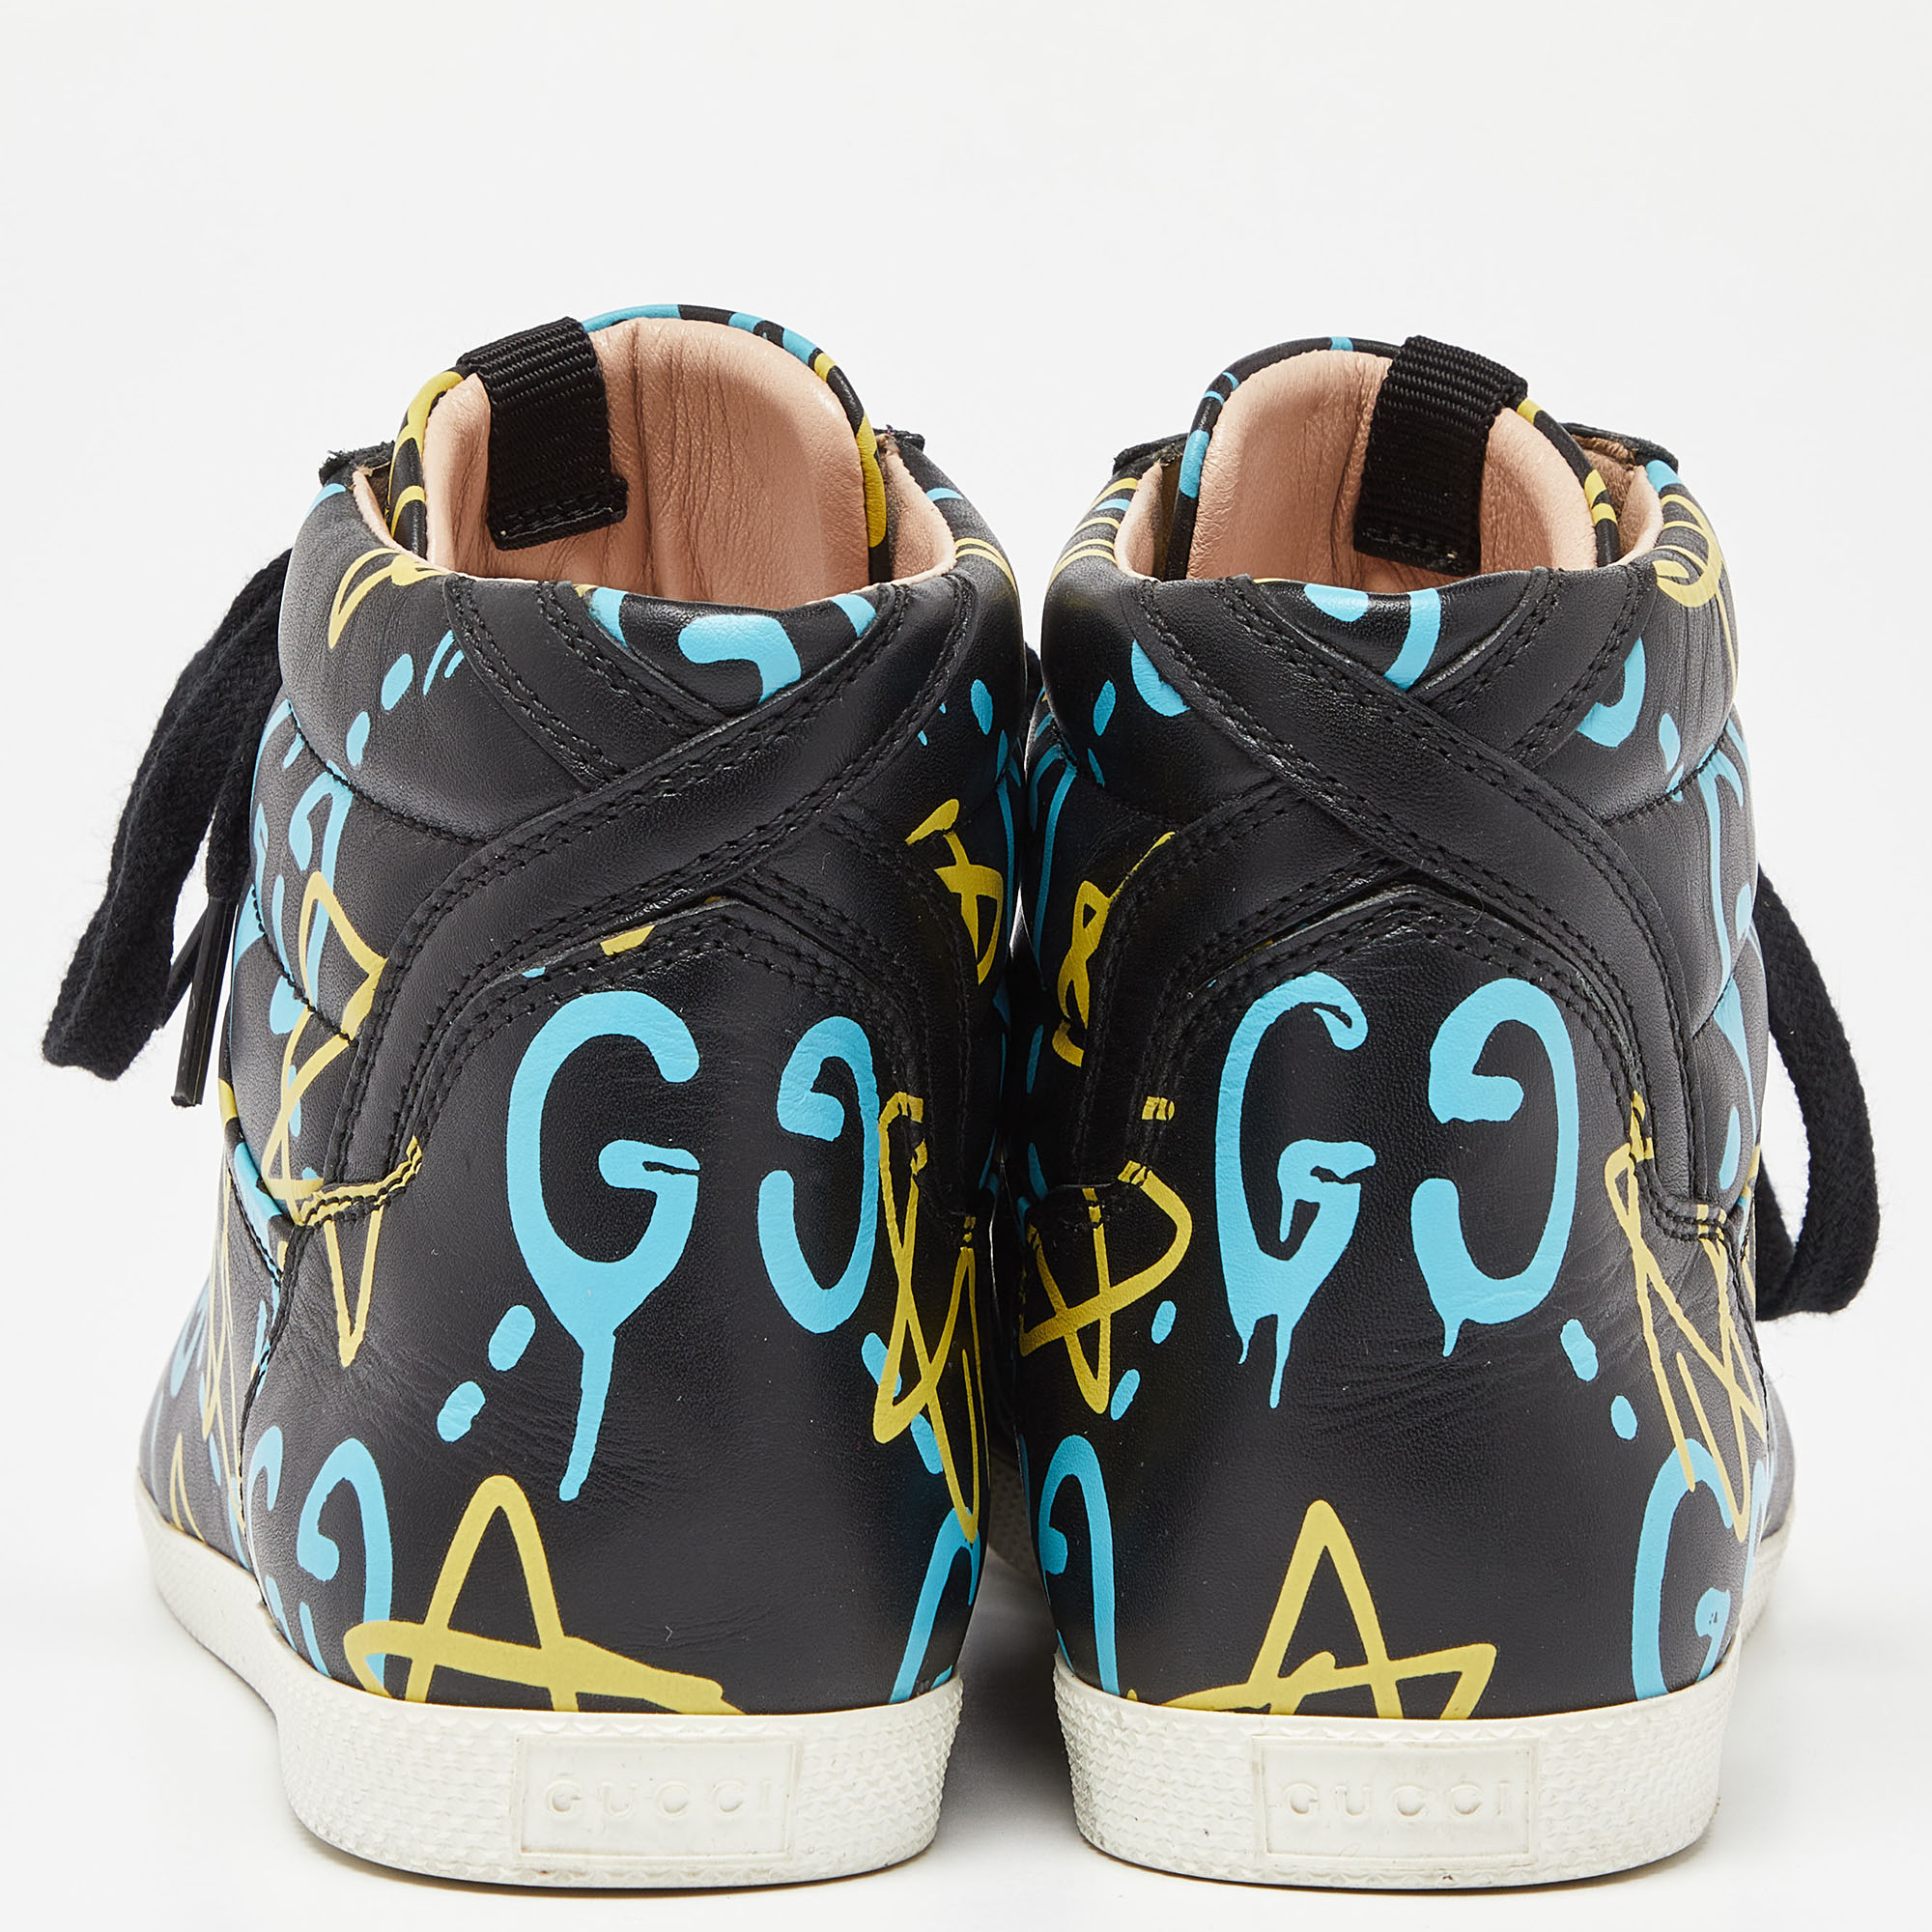 Gucci Black Graffiti Leather Ghost High Top Sneakers Size 35.5